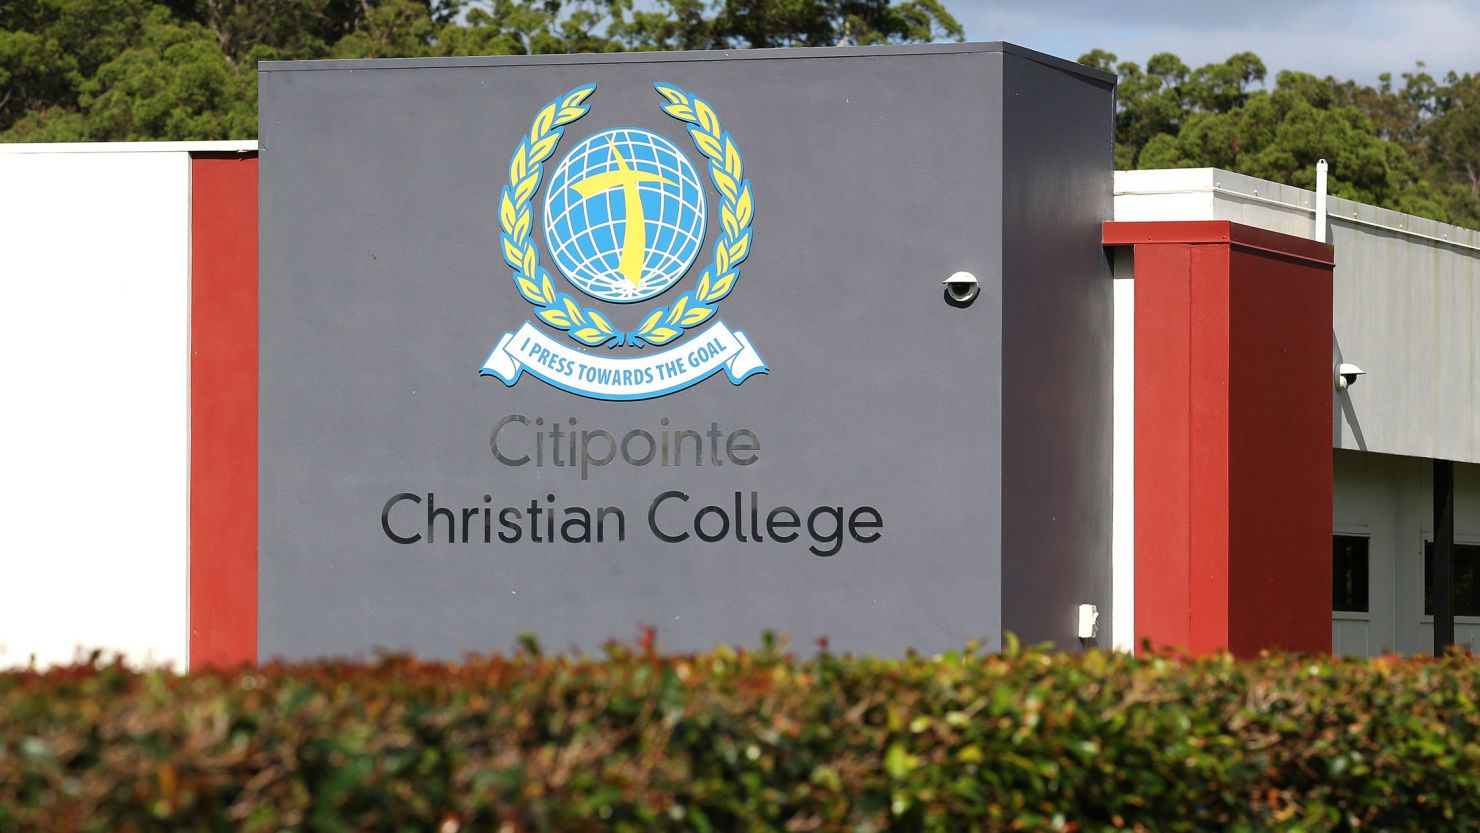 A general view of Citipointe Christian College in Brisbane, on January 31.